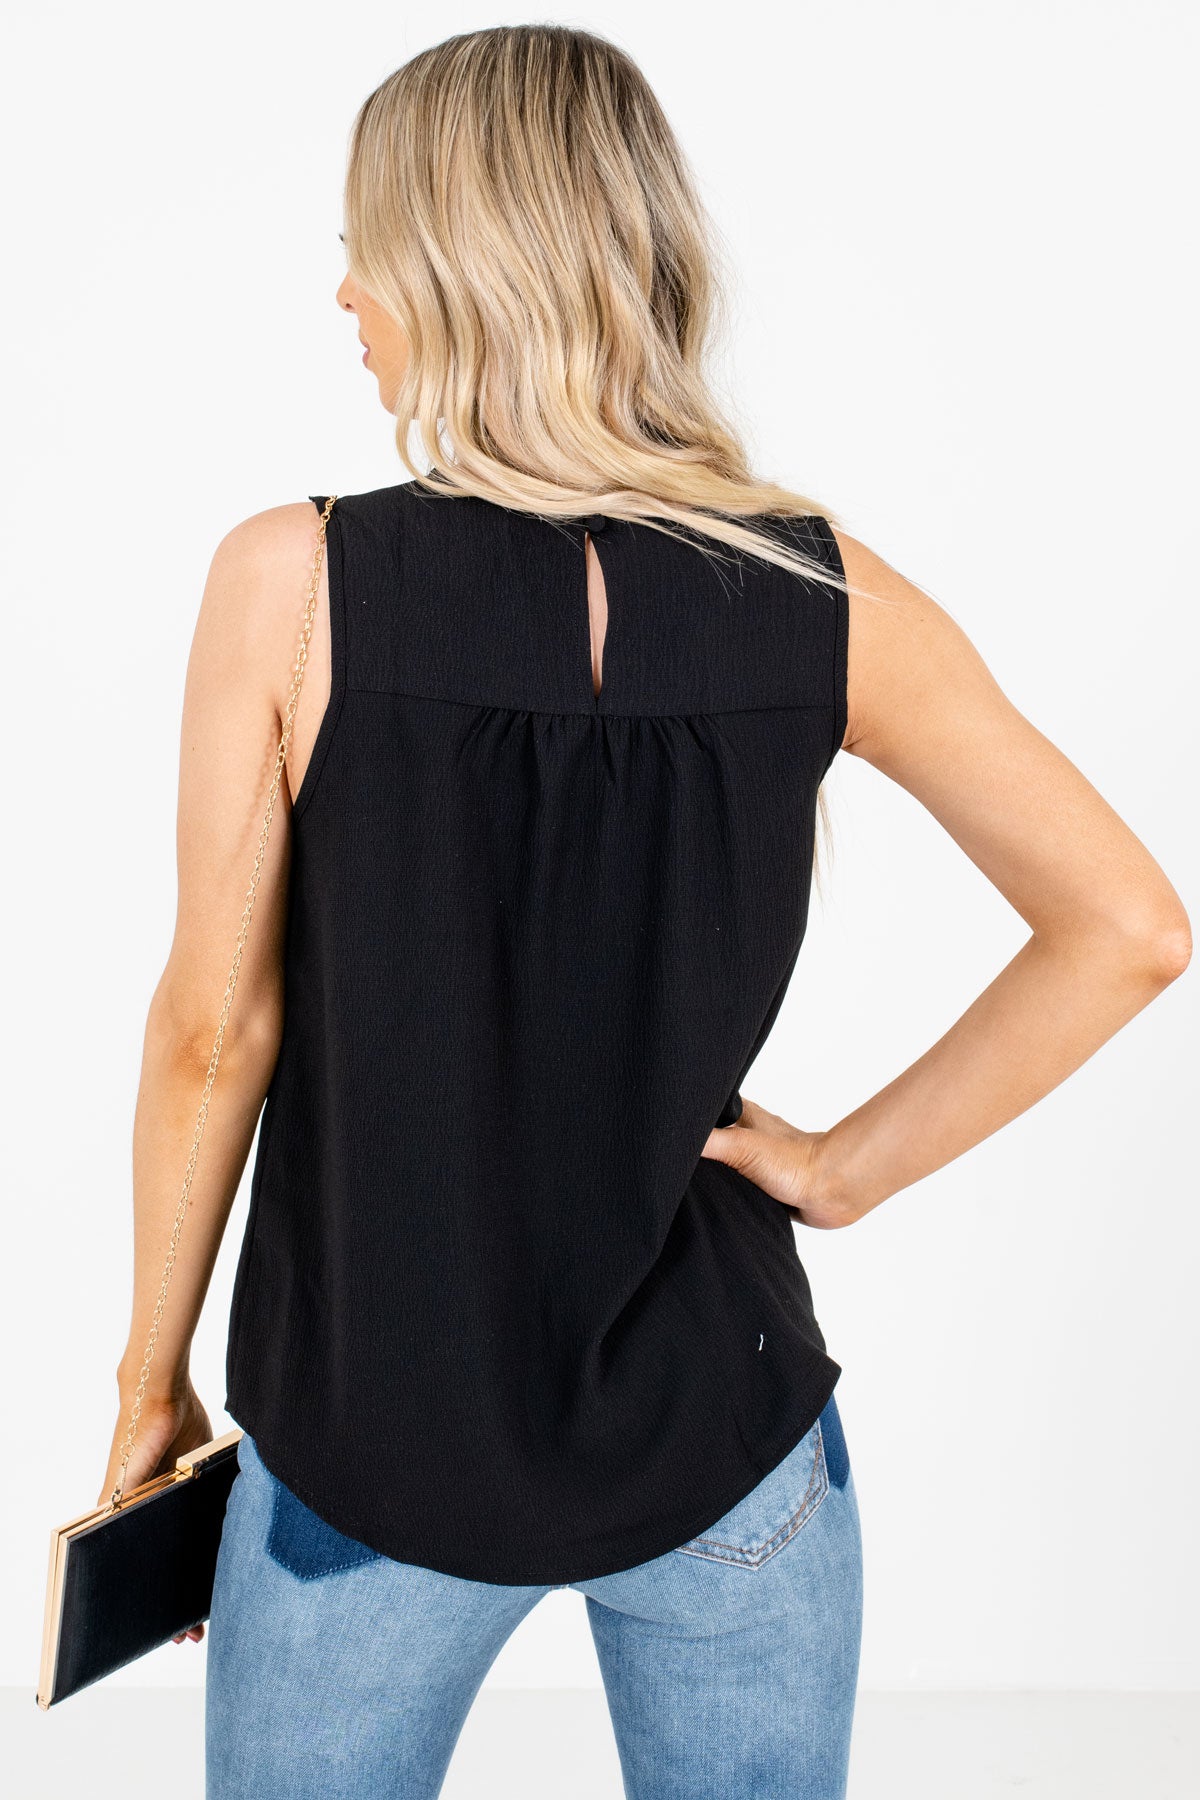 Black Pleated Accented Boutique Tank Tops for Women